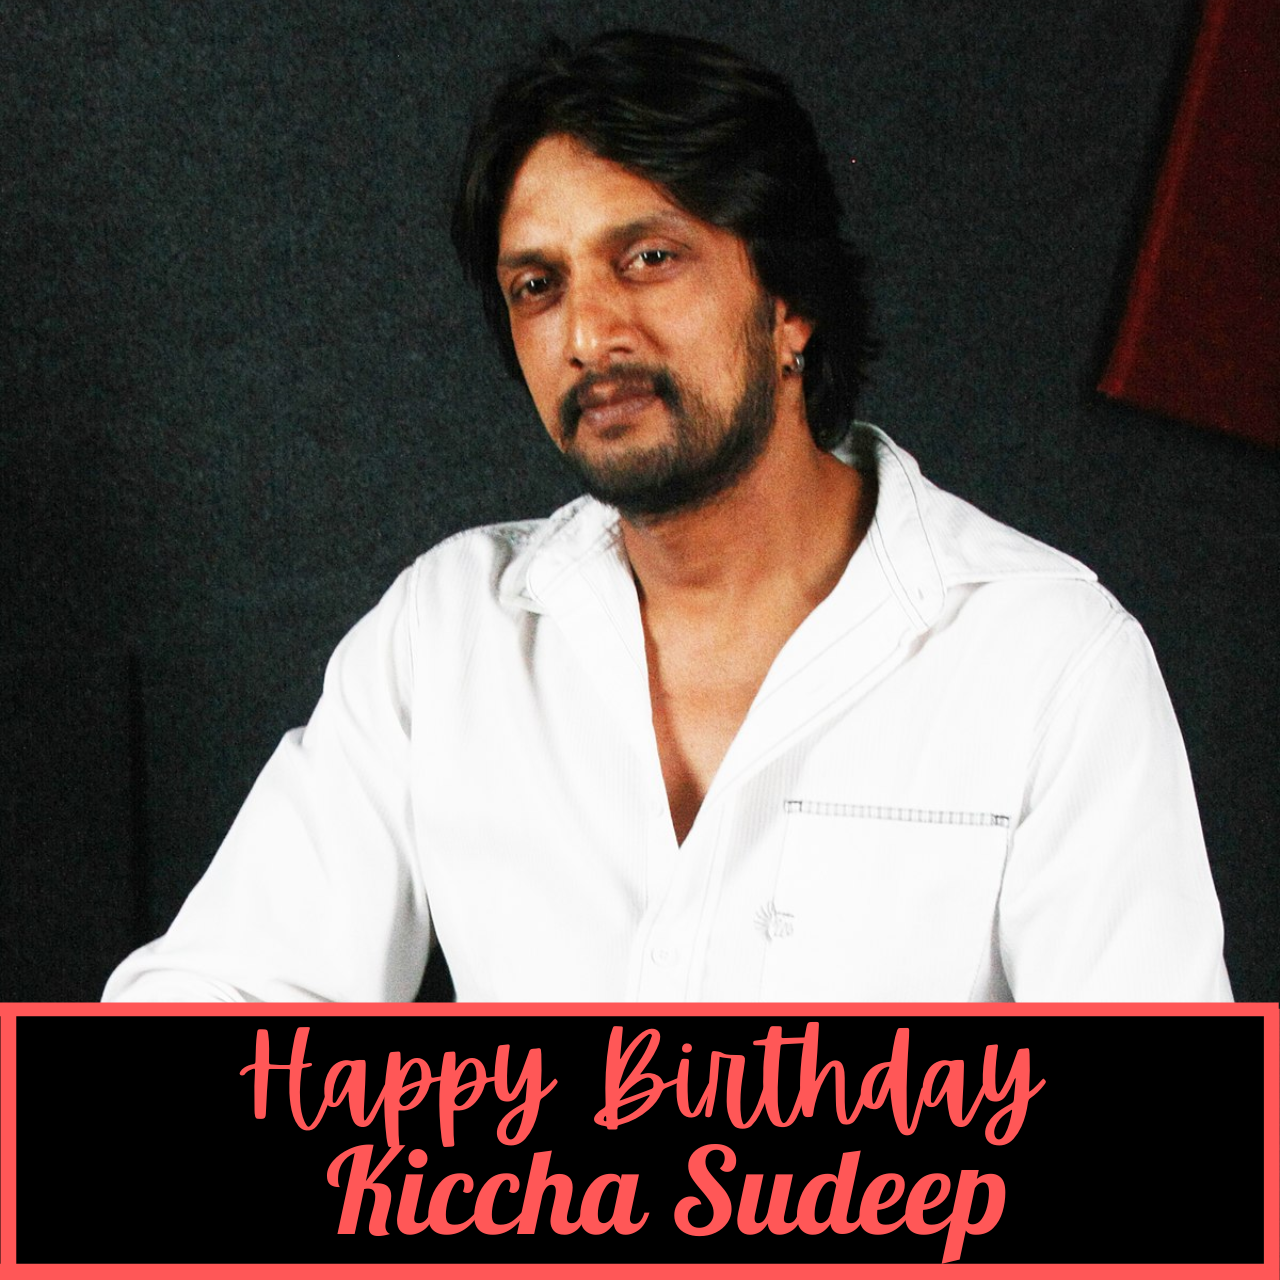 Happy Birthday Kiccha Sudeep: Wishes, Messages, Quotes, Greetings, Tweets, Songs, Banners and WhatsApp Status Video To Download